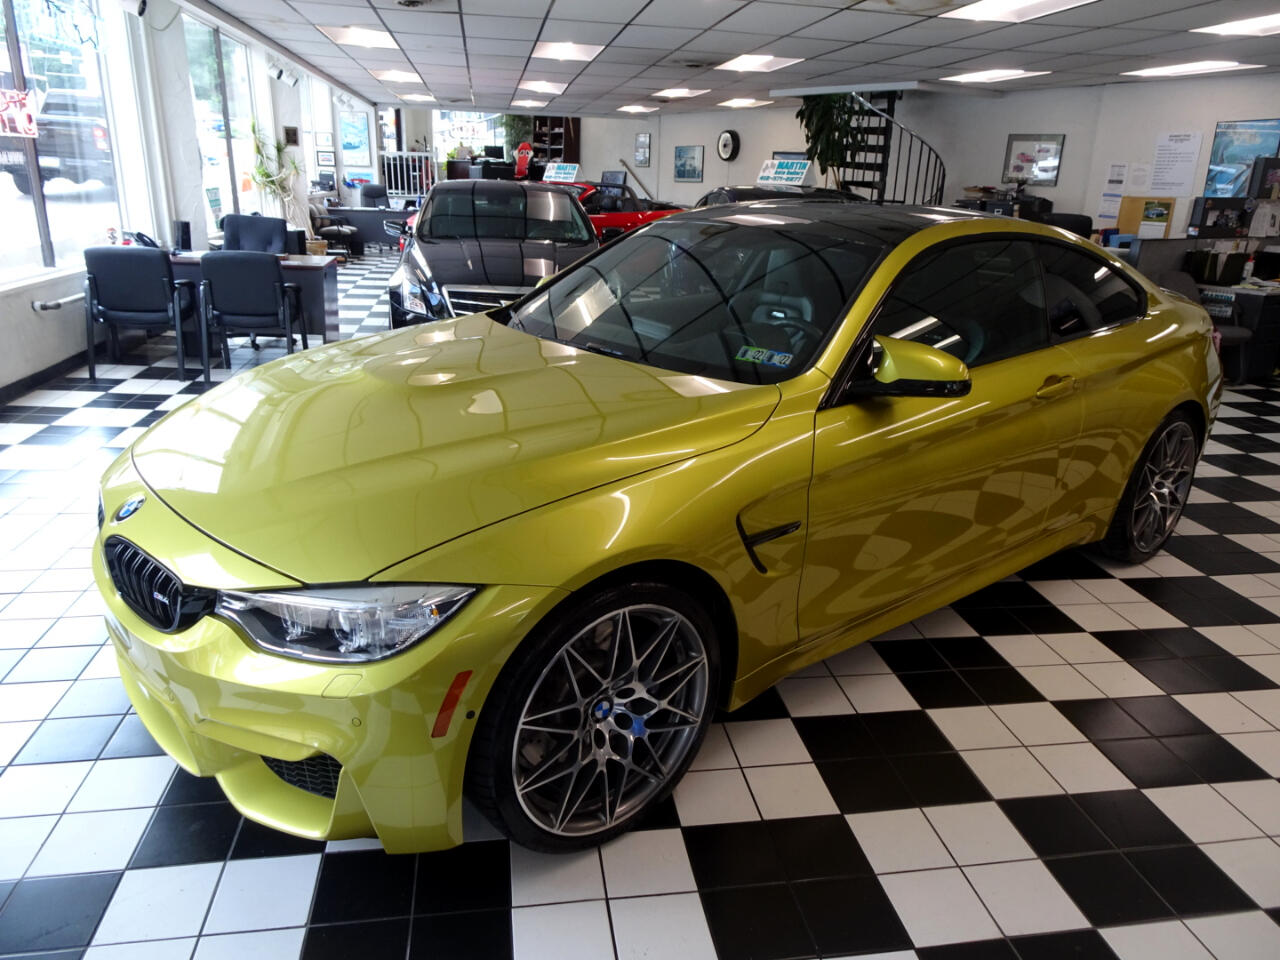 BMW M4 Coupe 2017